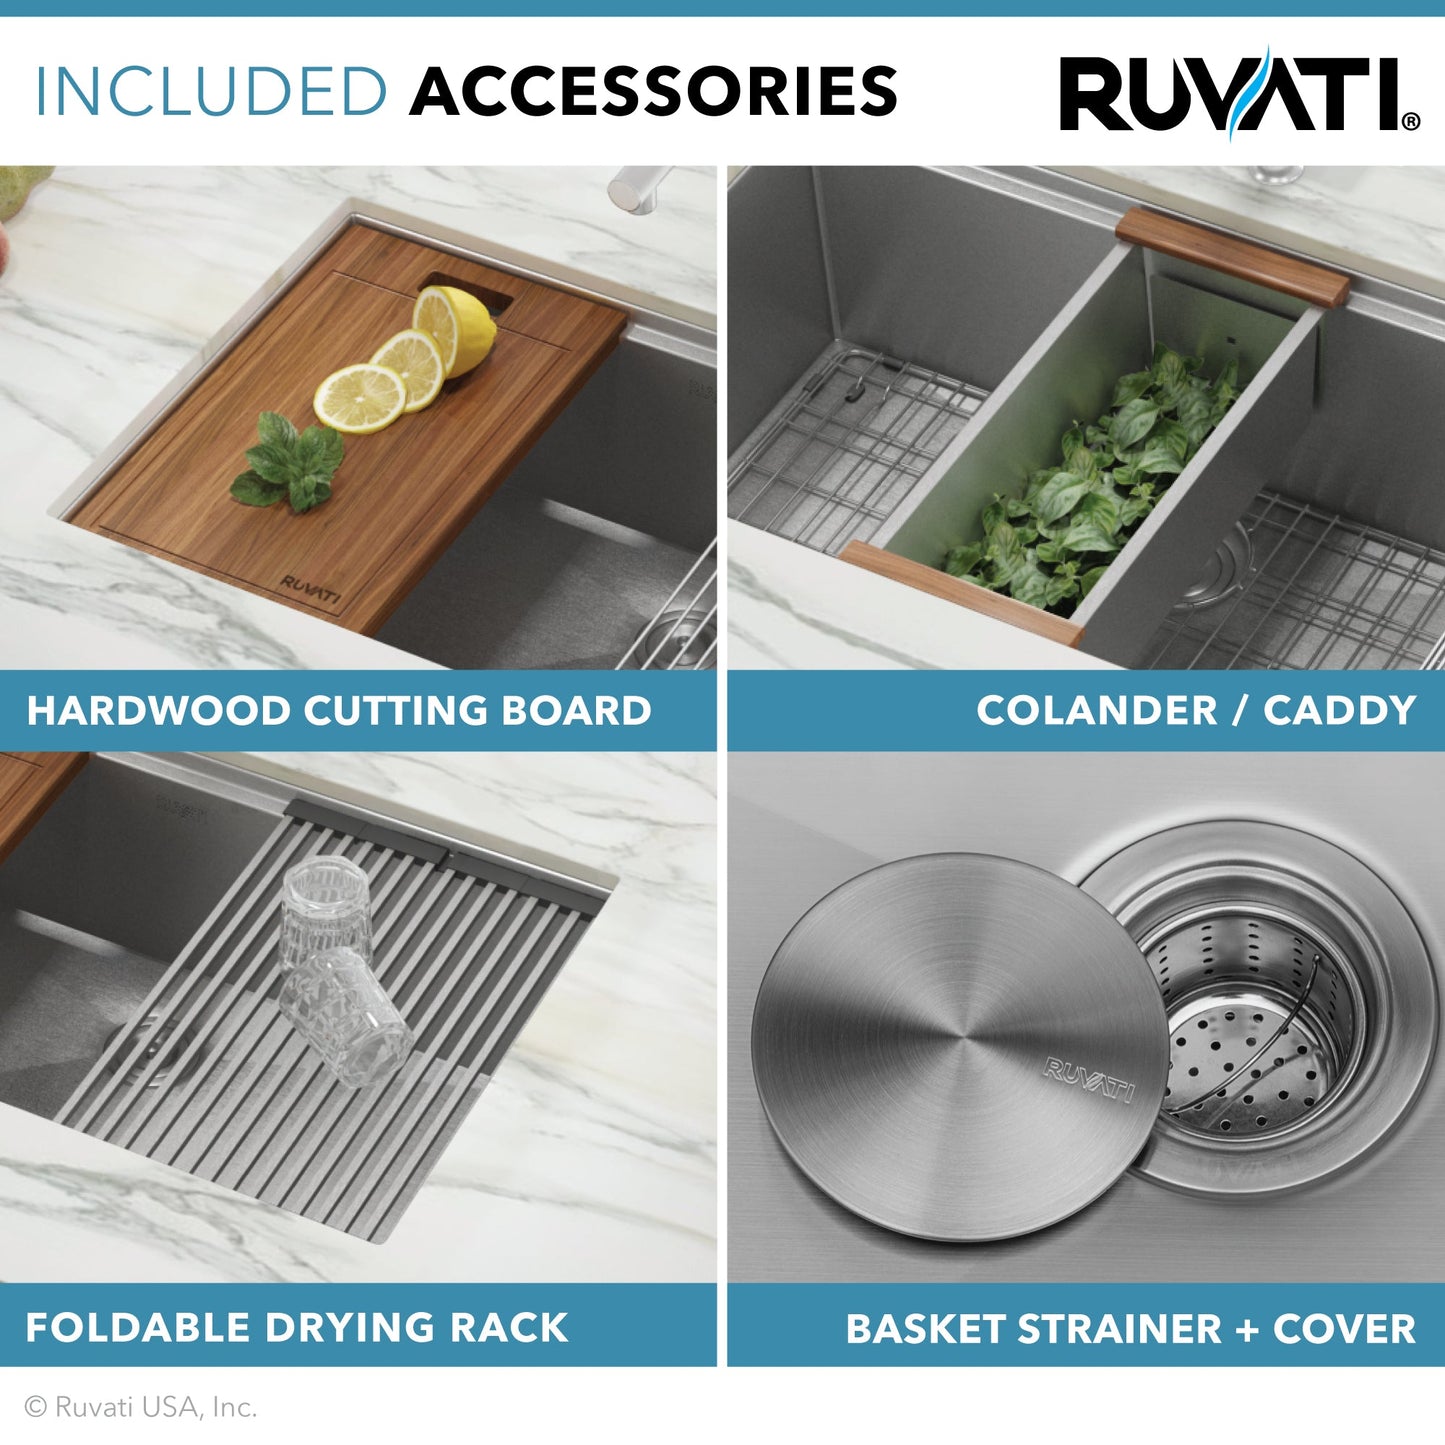 Ruvati Roma 28" x 19" Undermount Stainless Steel Double Bowl 60/40 Workstation Sink With Bottom Rinse Grid and Drain Assembly